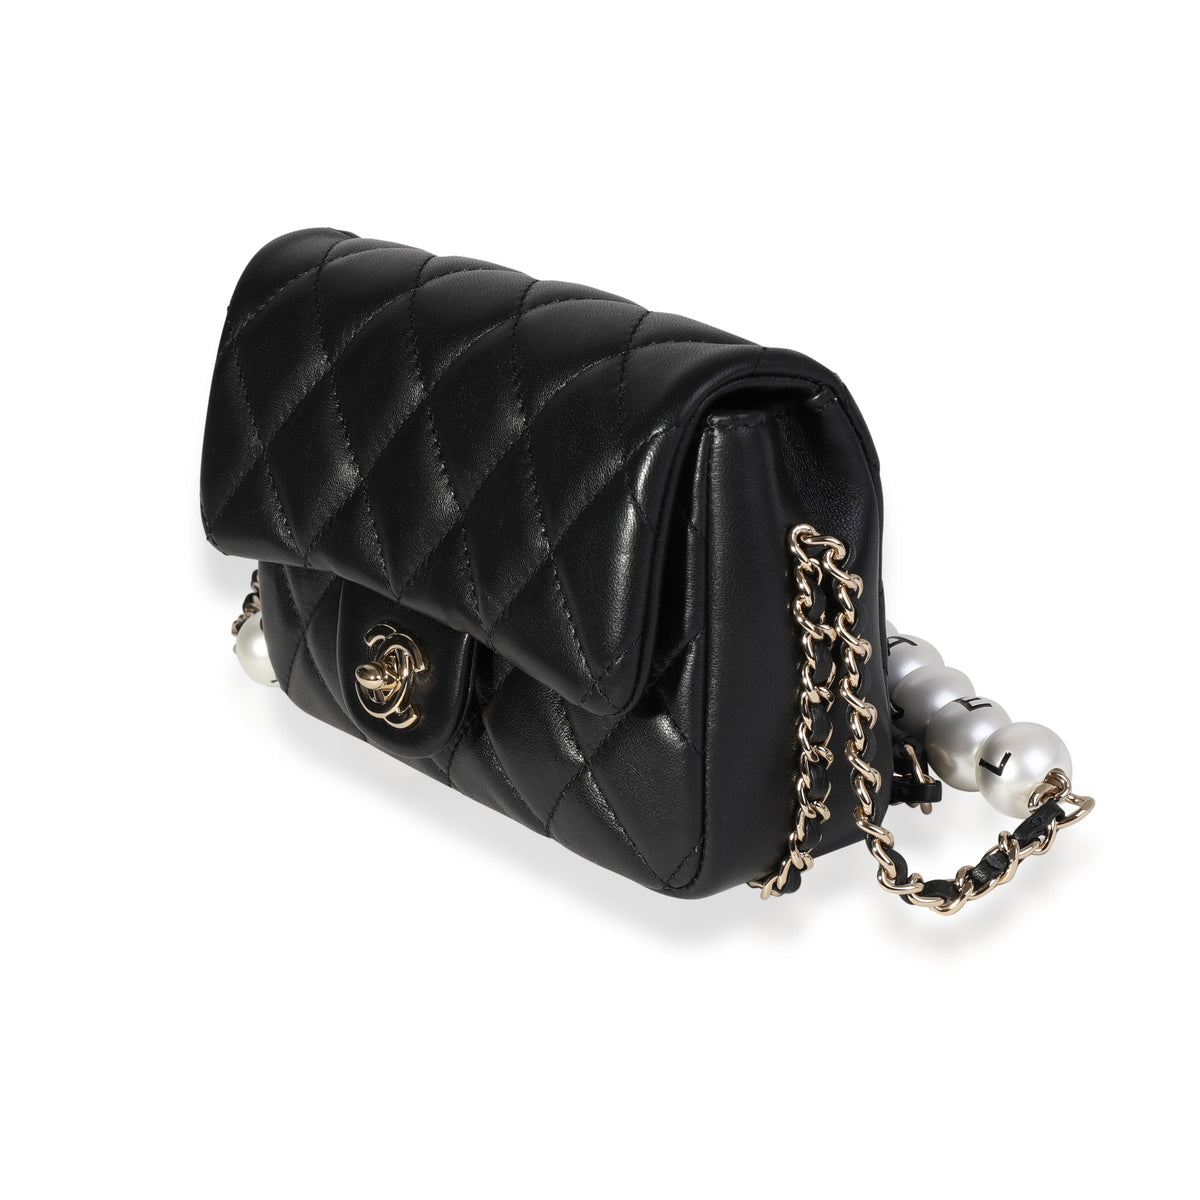 4 Chanel Pearl Strap Bags That I Love  YouTube